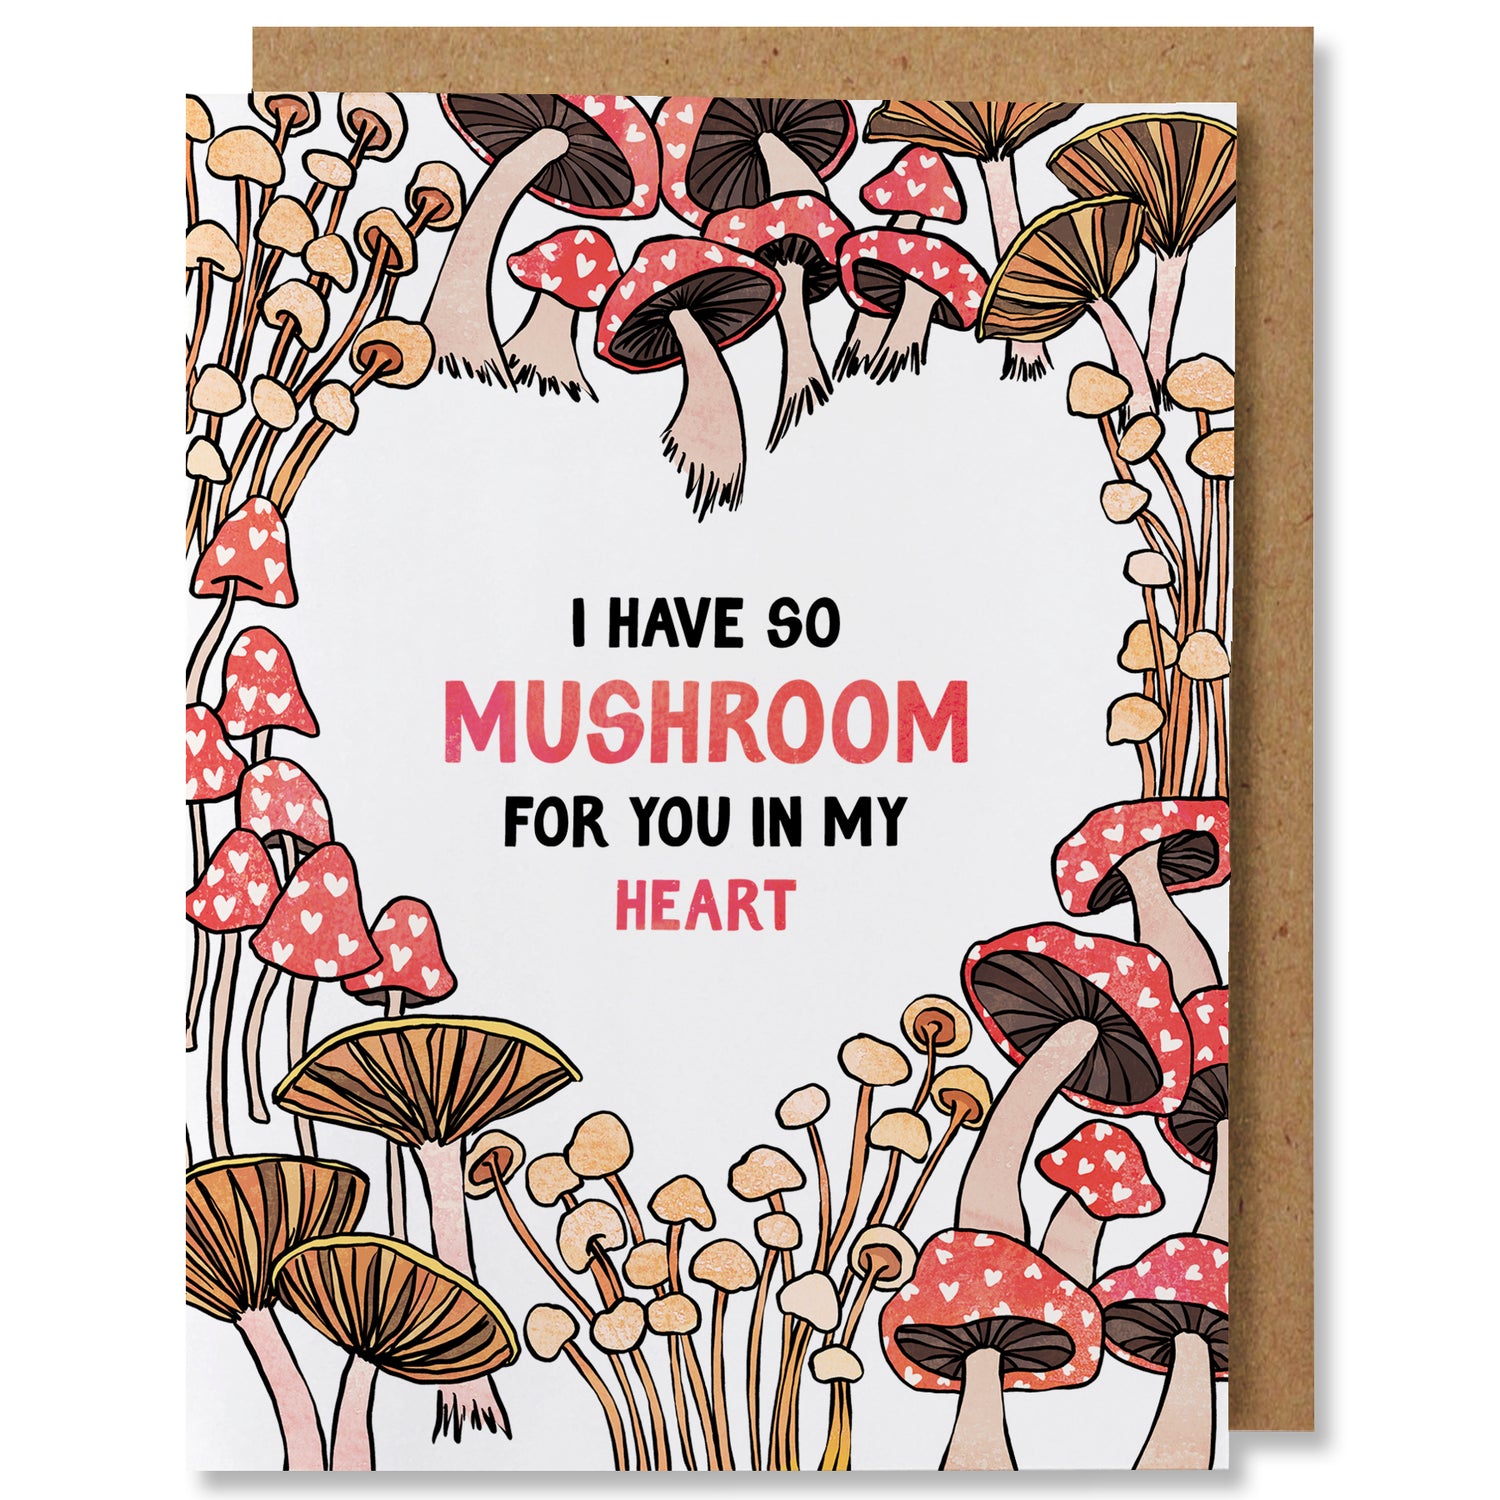 Greeting card featuring a full bleed illustration of a variety of mushrooms in earth tone colors, some have red caps with white heart spots. The mushrooms create a white negative space in the center for the message "I have so mushroom for you in my heart”